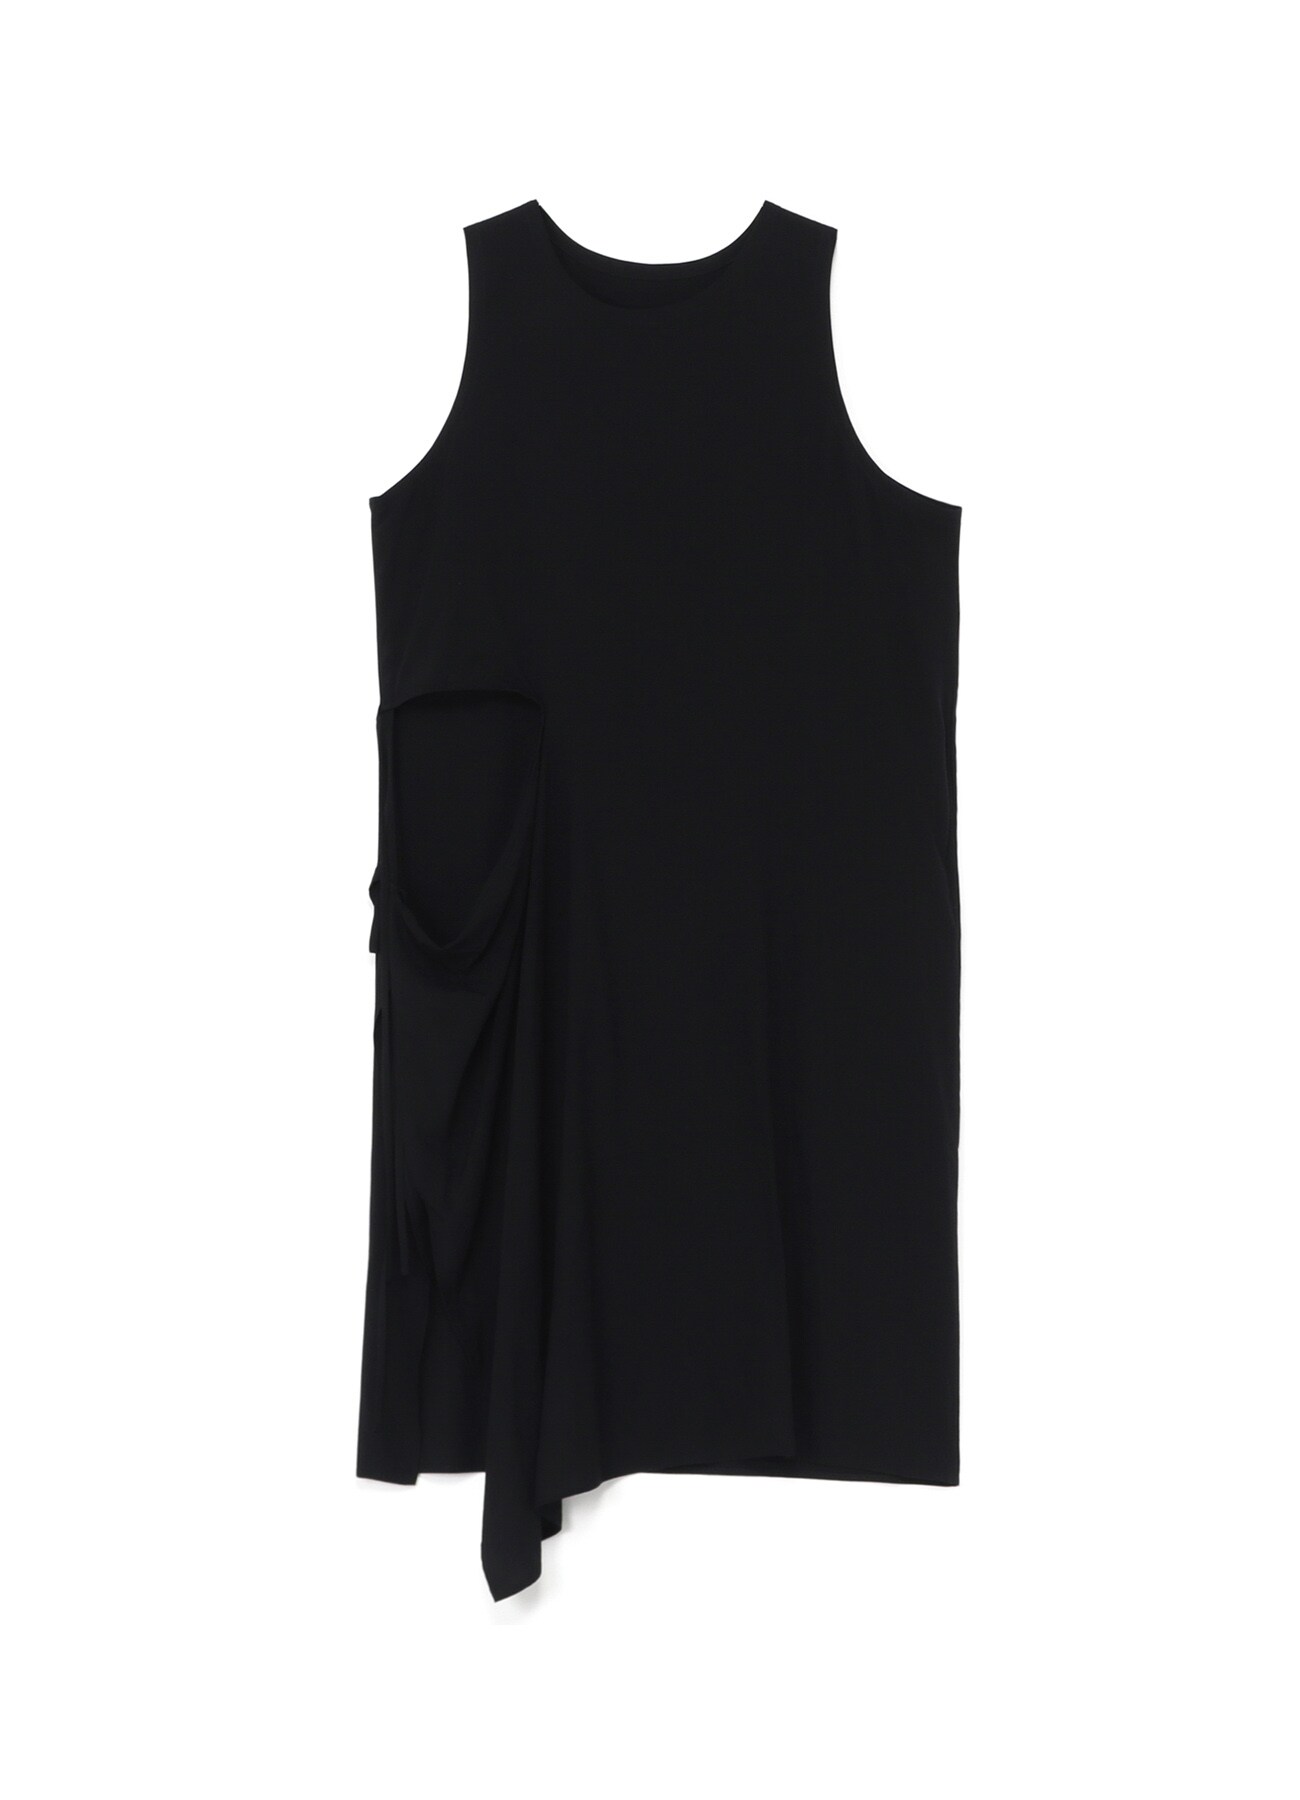 RAYON DRESS WITH SLASH IN RIGHT SIDE	